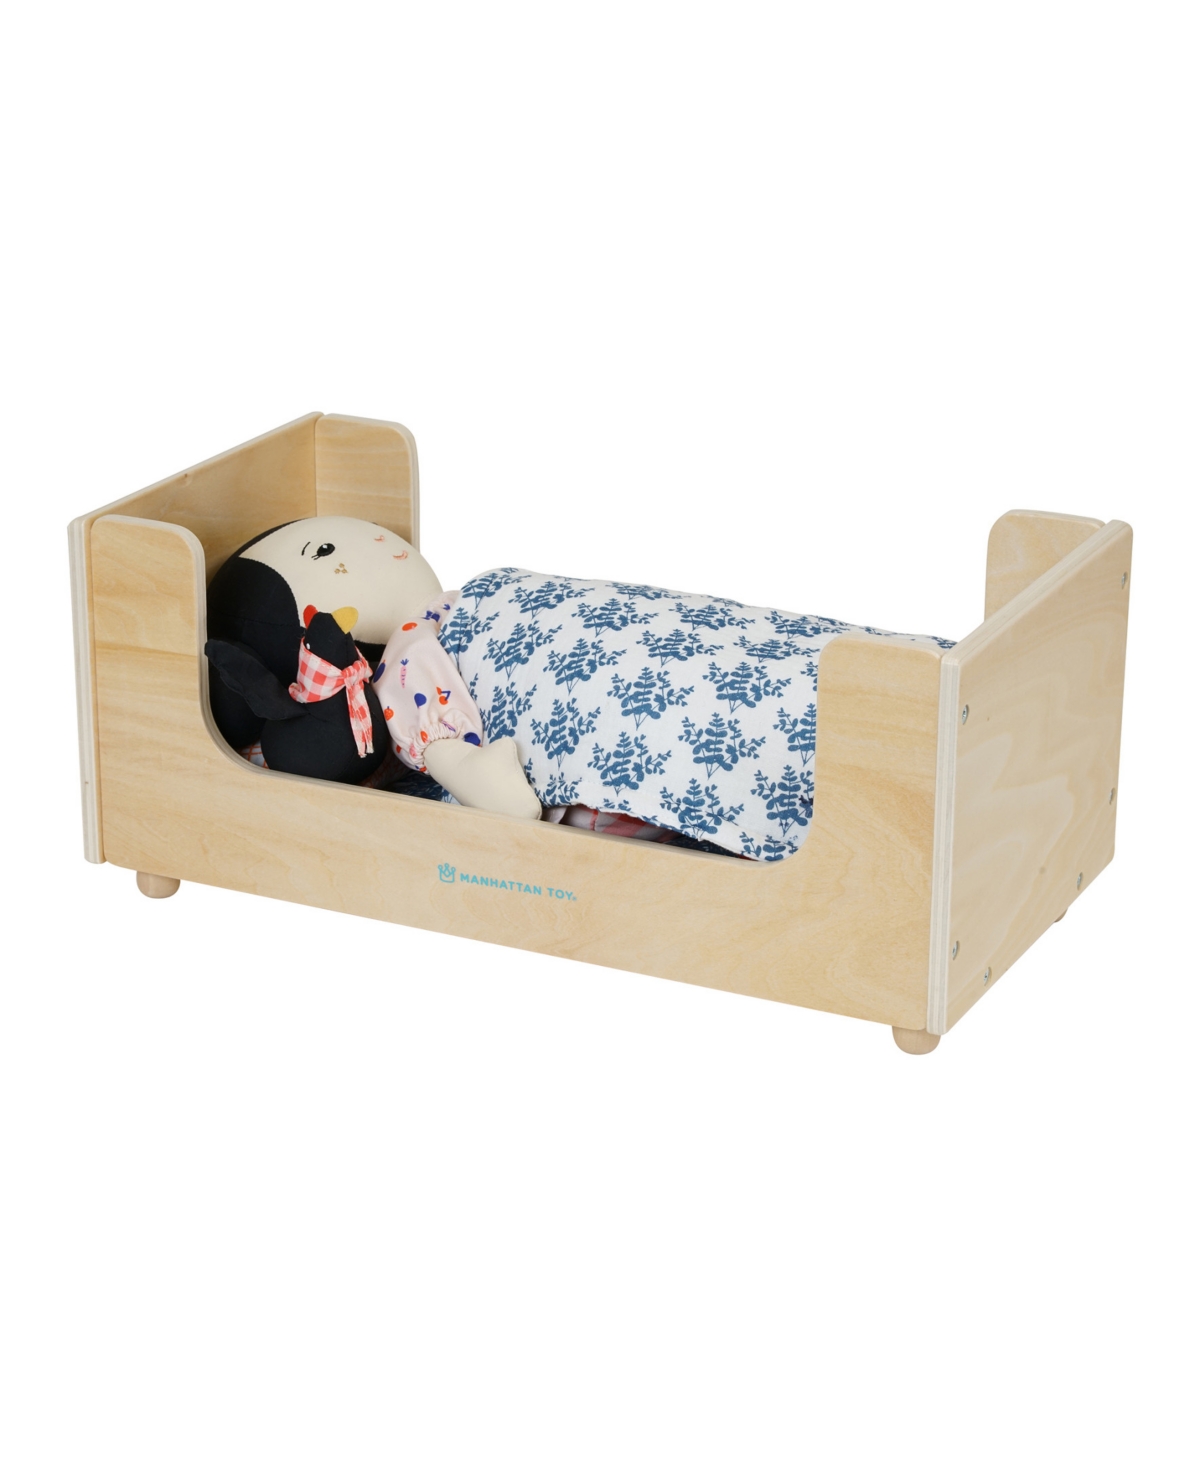 Shop Manhattan Toy Company Sleep Tight Wooden Play Sleigh Bed With Pillow And Blanket For Dolls And Stuffed Animals In Multicolor